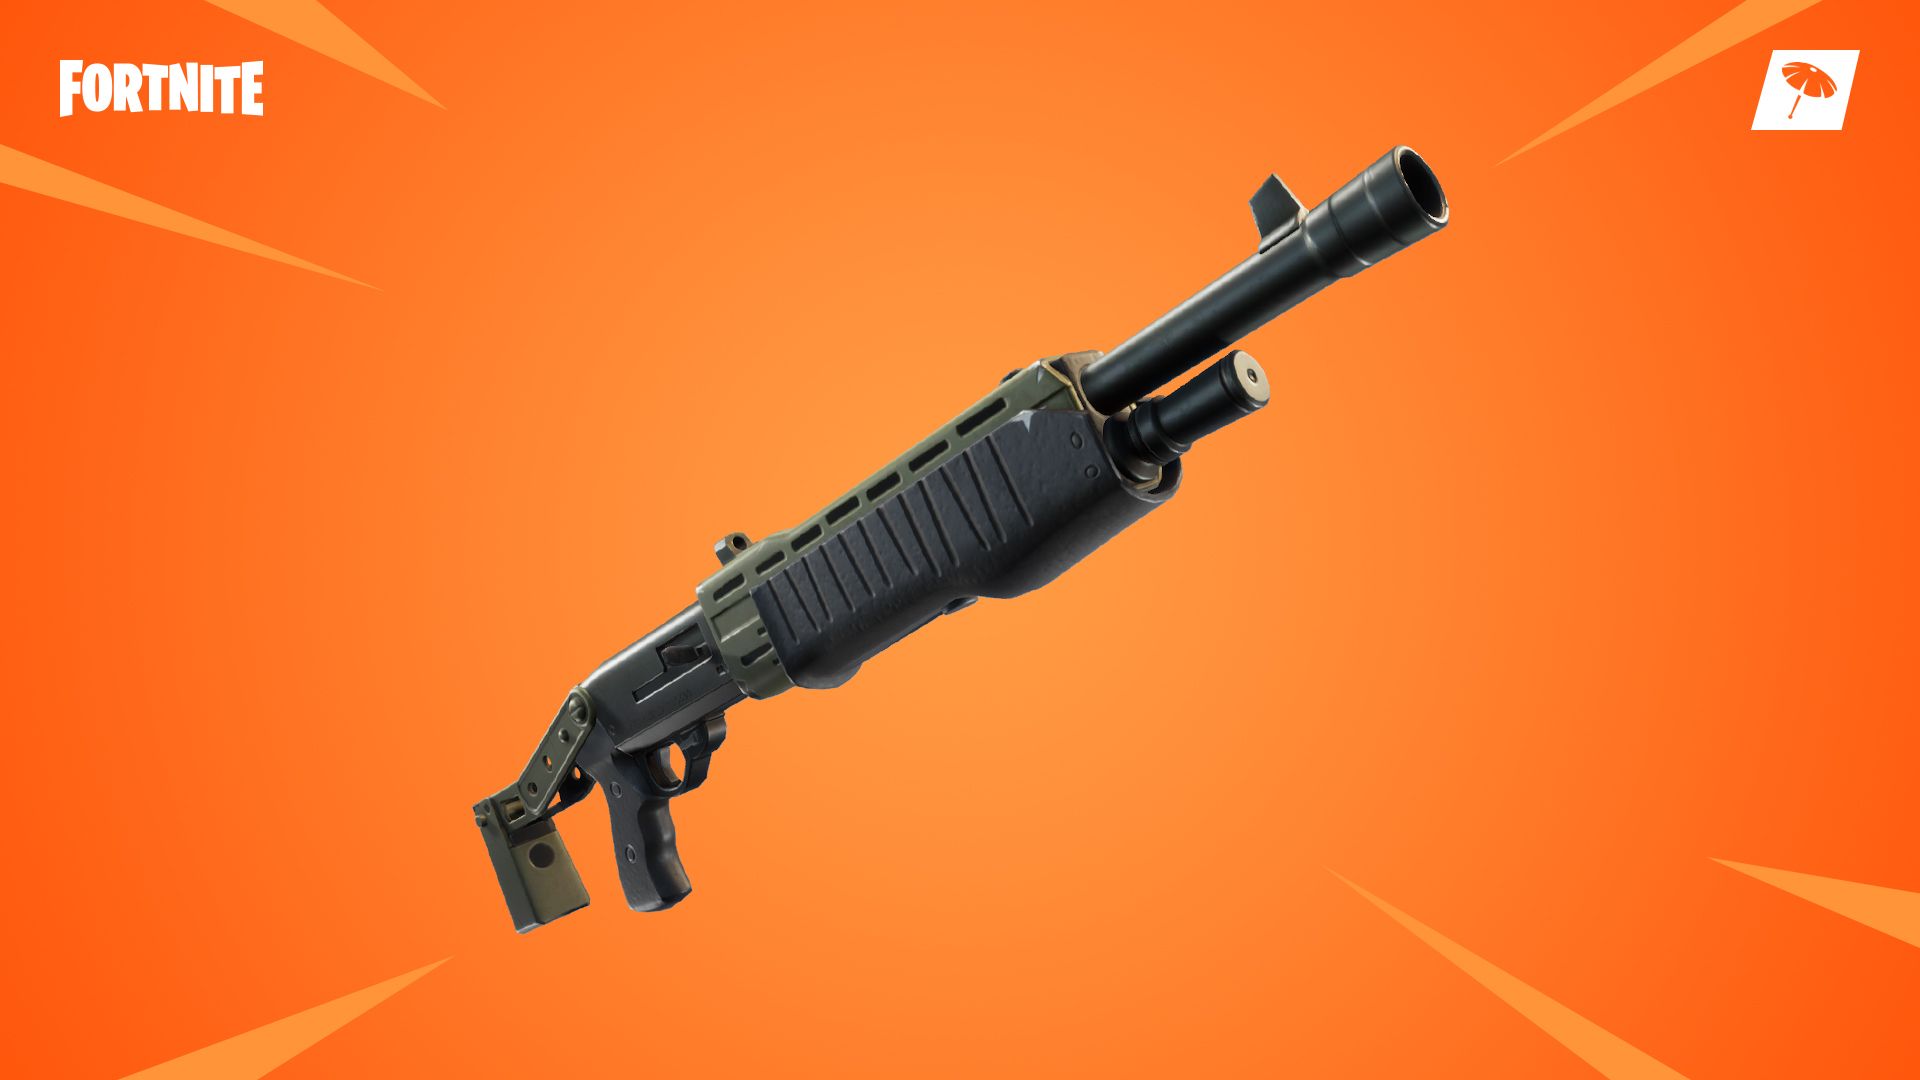 The shotgun spread in Fortnite might be bugged